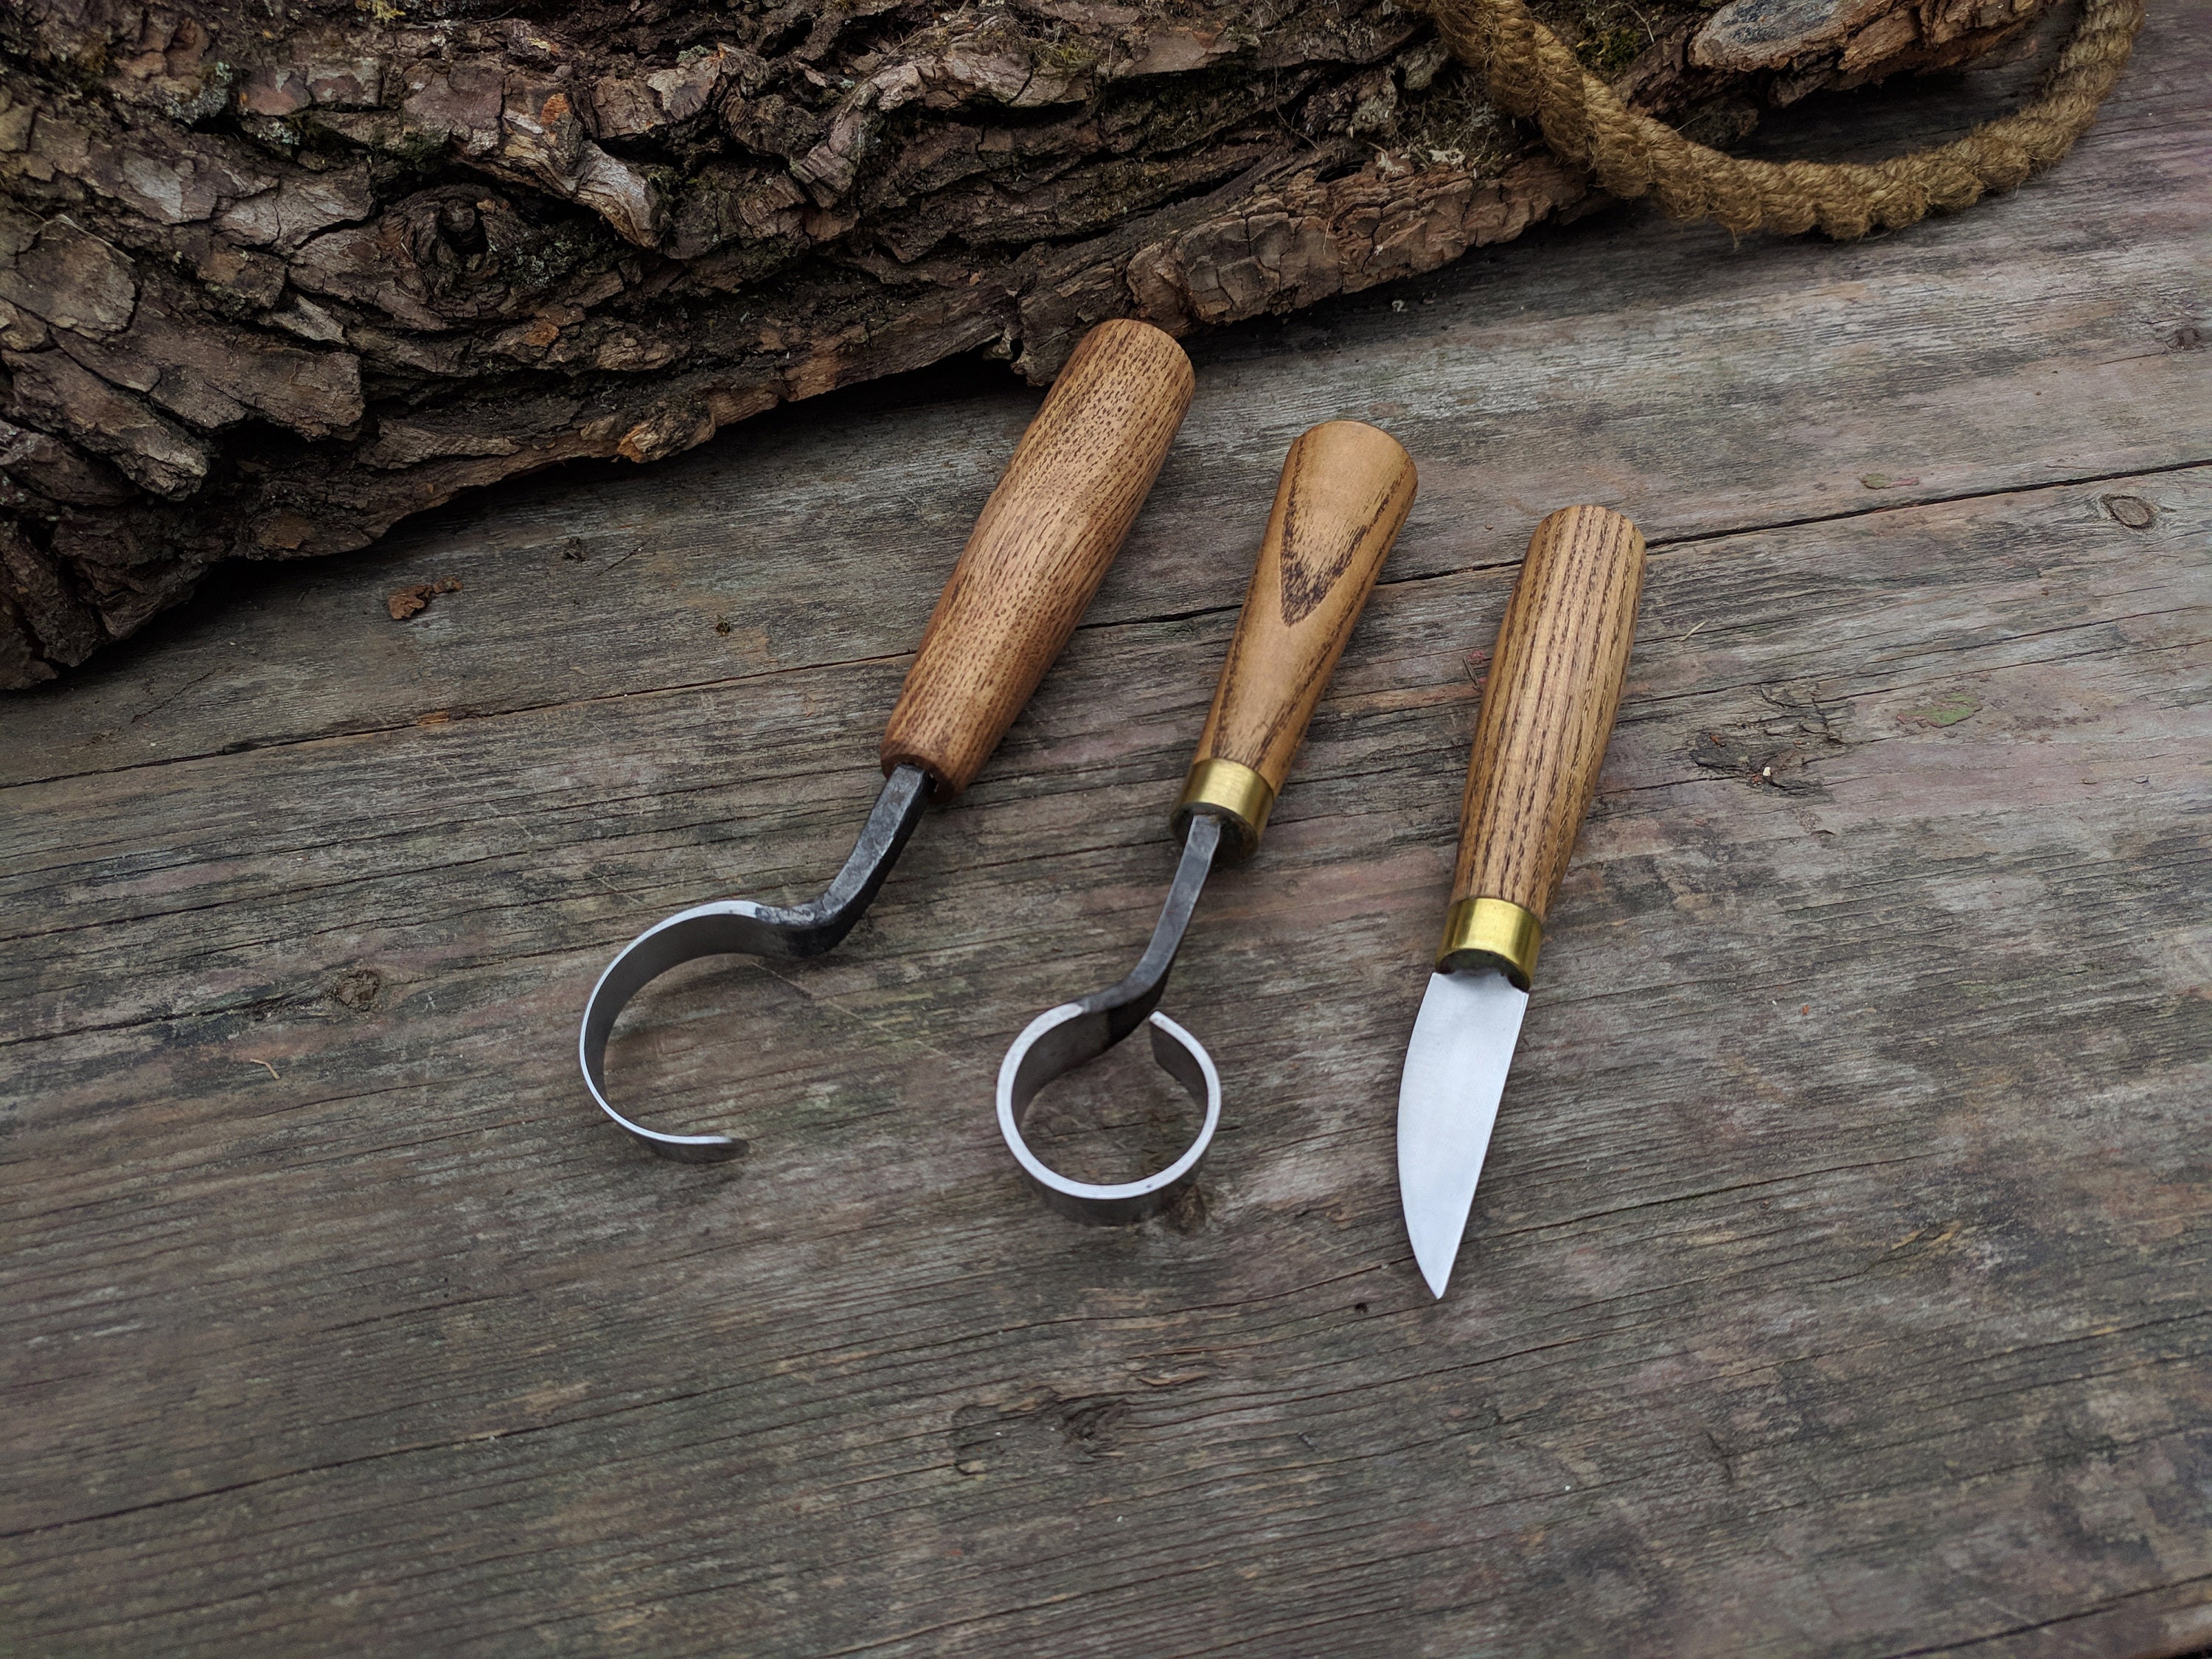 Spoon Carving Knife Set 3pcs. Forged Spoon Carving Knife. Knives Carving  Bowl Kuksa. Spoon Carving Tools. Hand Forged Wood Carving Tool. 